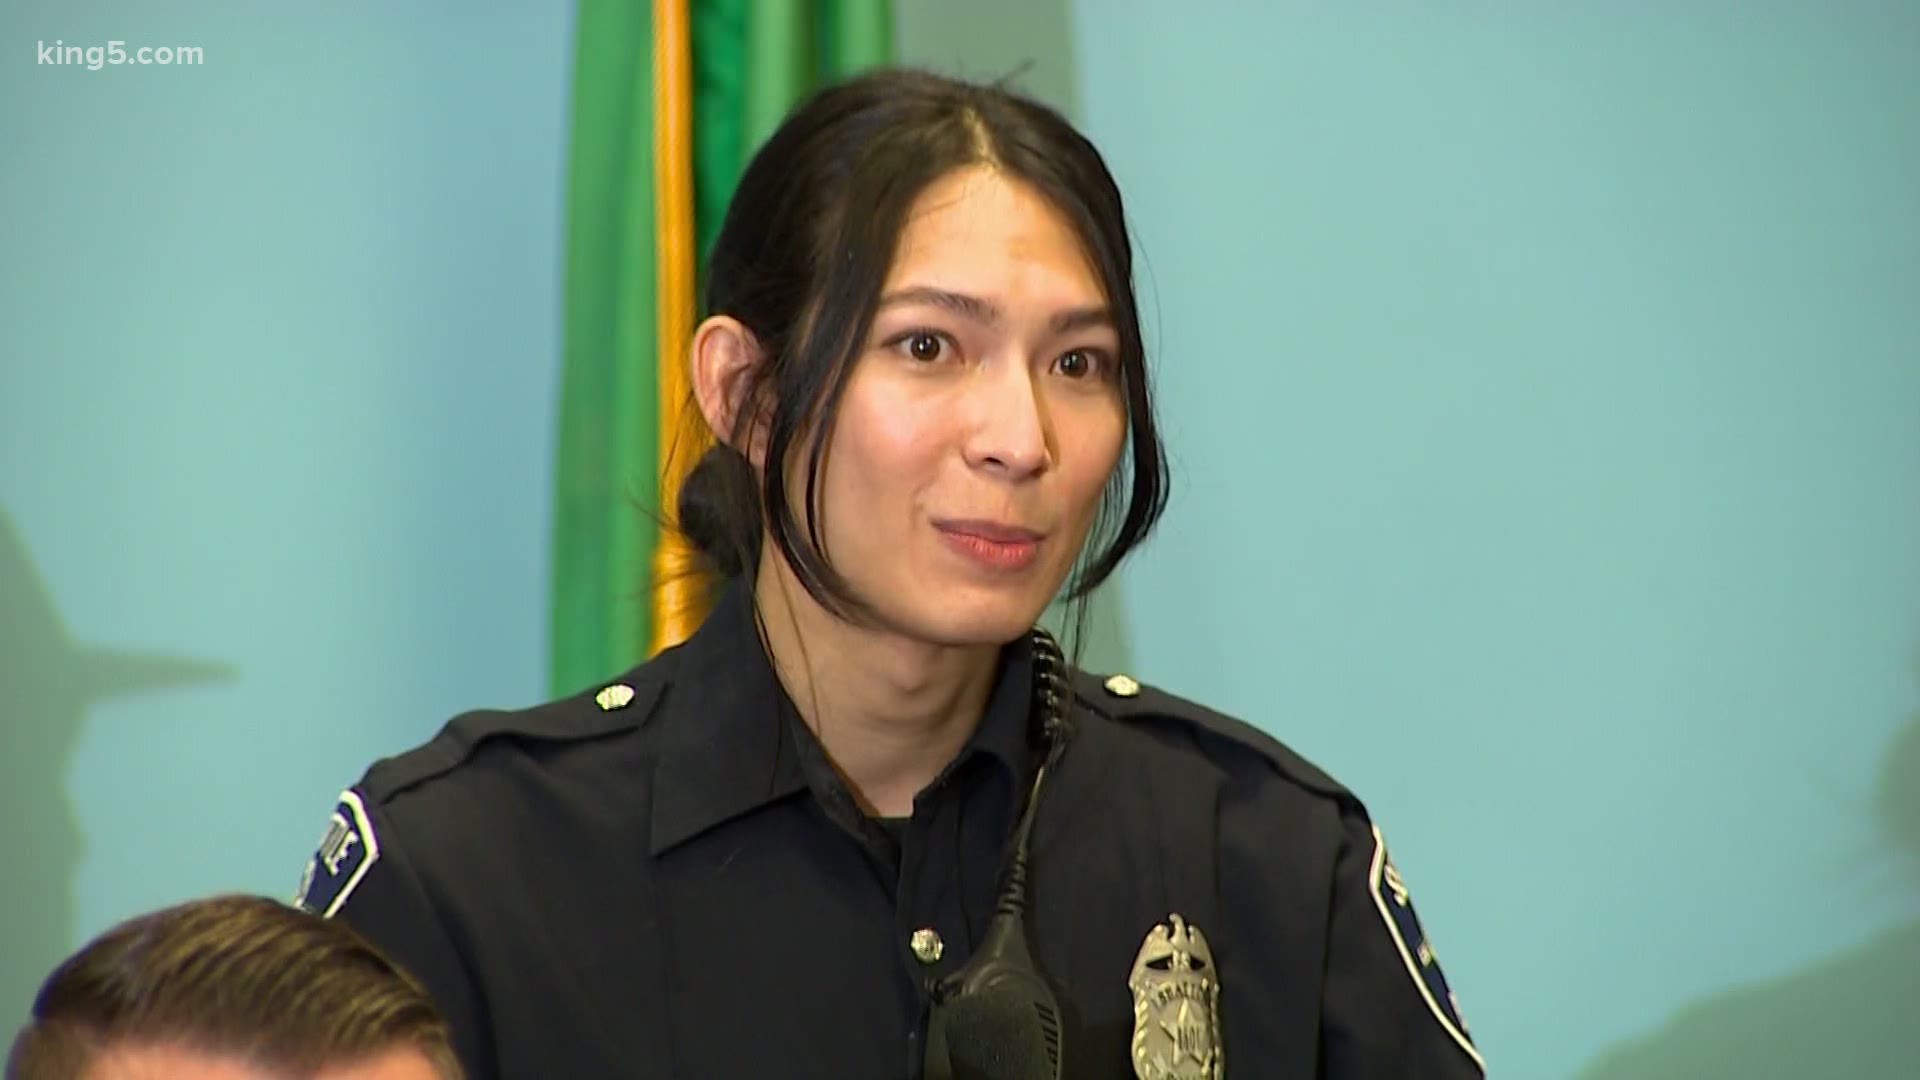 Younger officers of color have the least seniority and could be the first ones laid off, SPD argued. City council members say there are ways to avoid that.